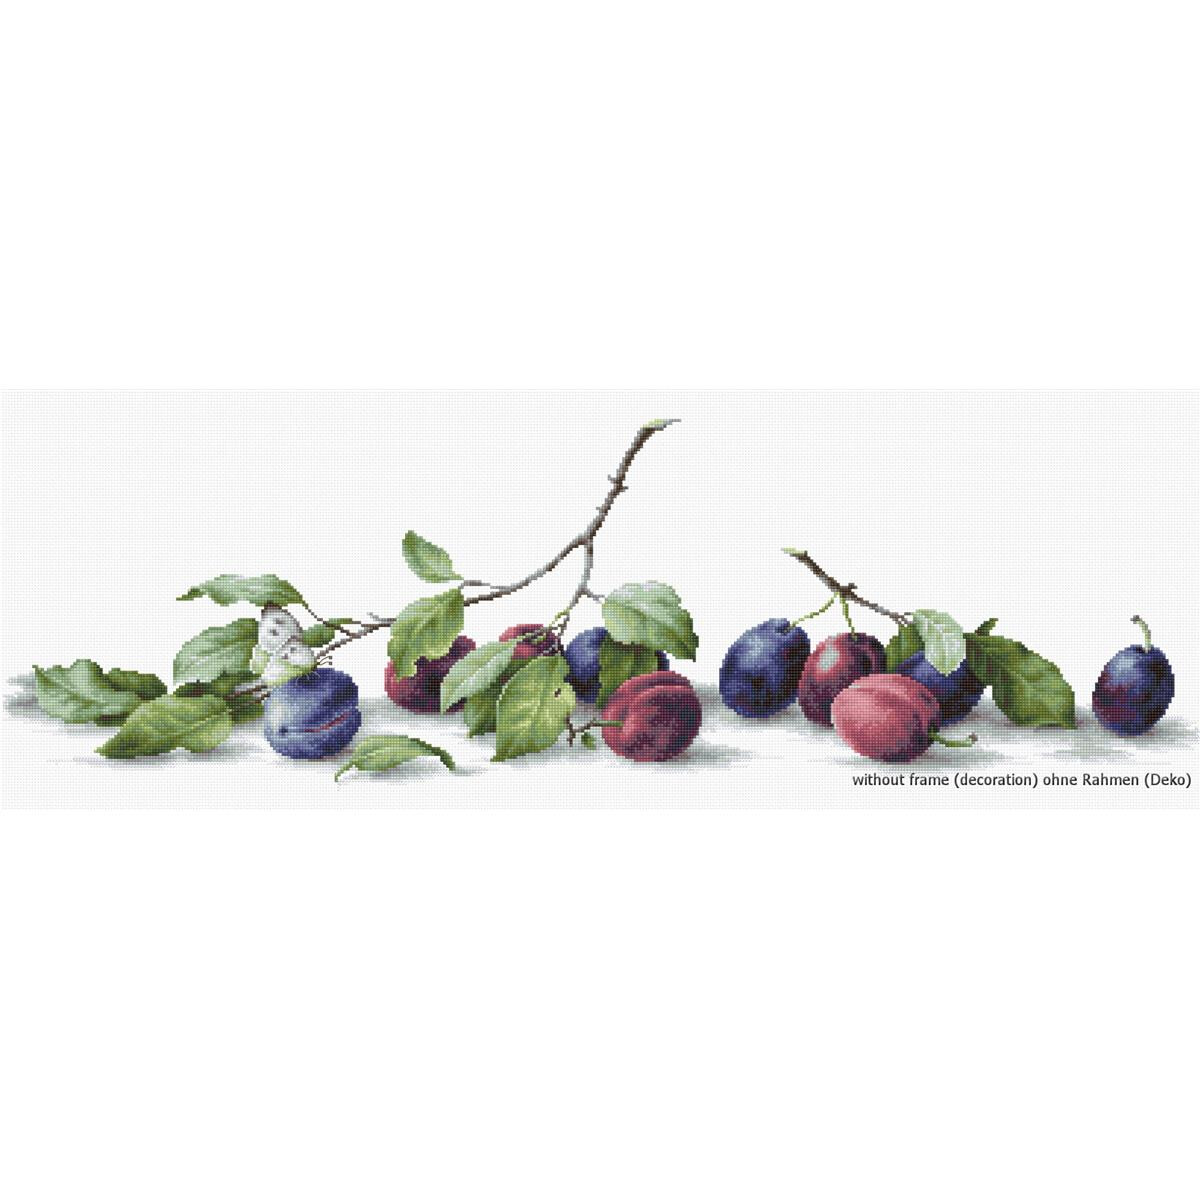 Illustration of several ripe plums in shades of purple,...